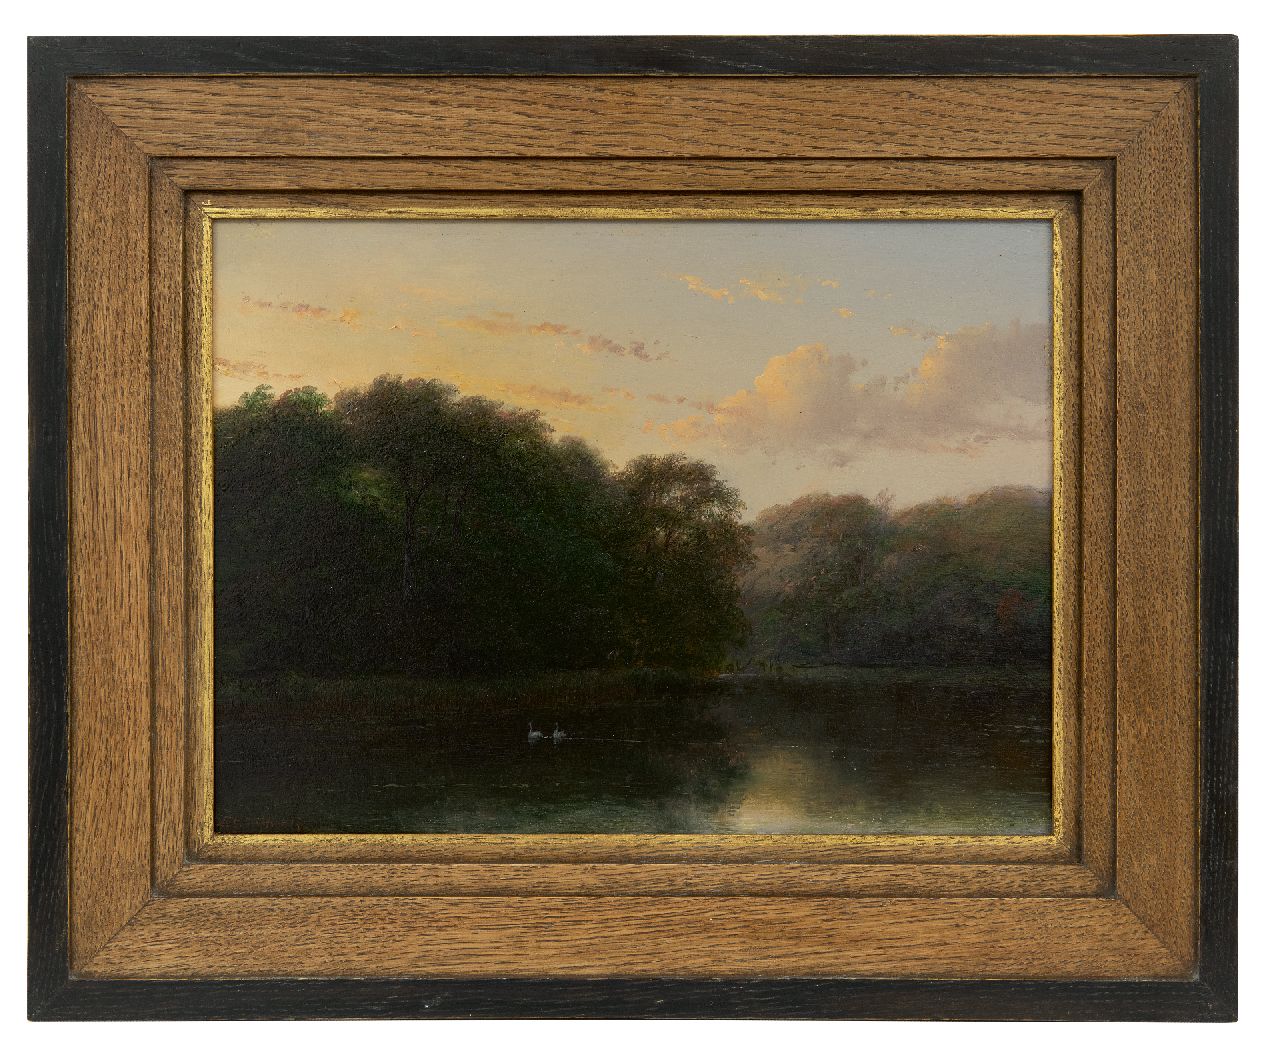 Schelfhout A.  | Andreas Schelfhout | Paintings offered for sale | Two swans in the pond of the Haagse Bos, oil on panel 24.0 x 32.6 cm, signed l.l.